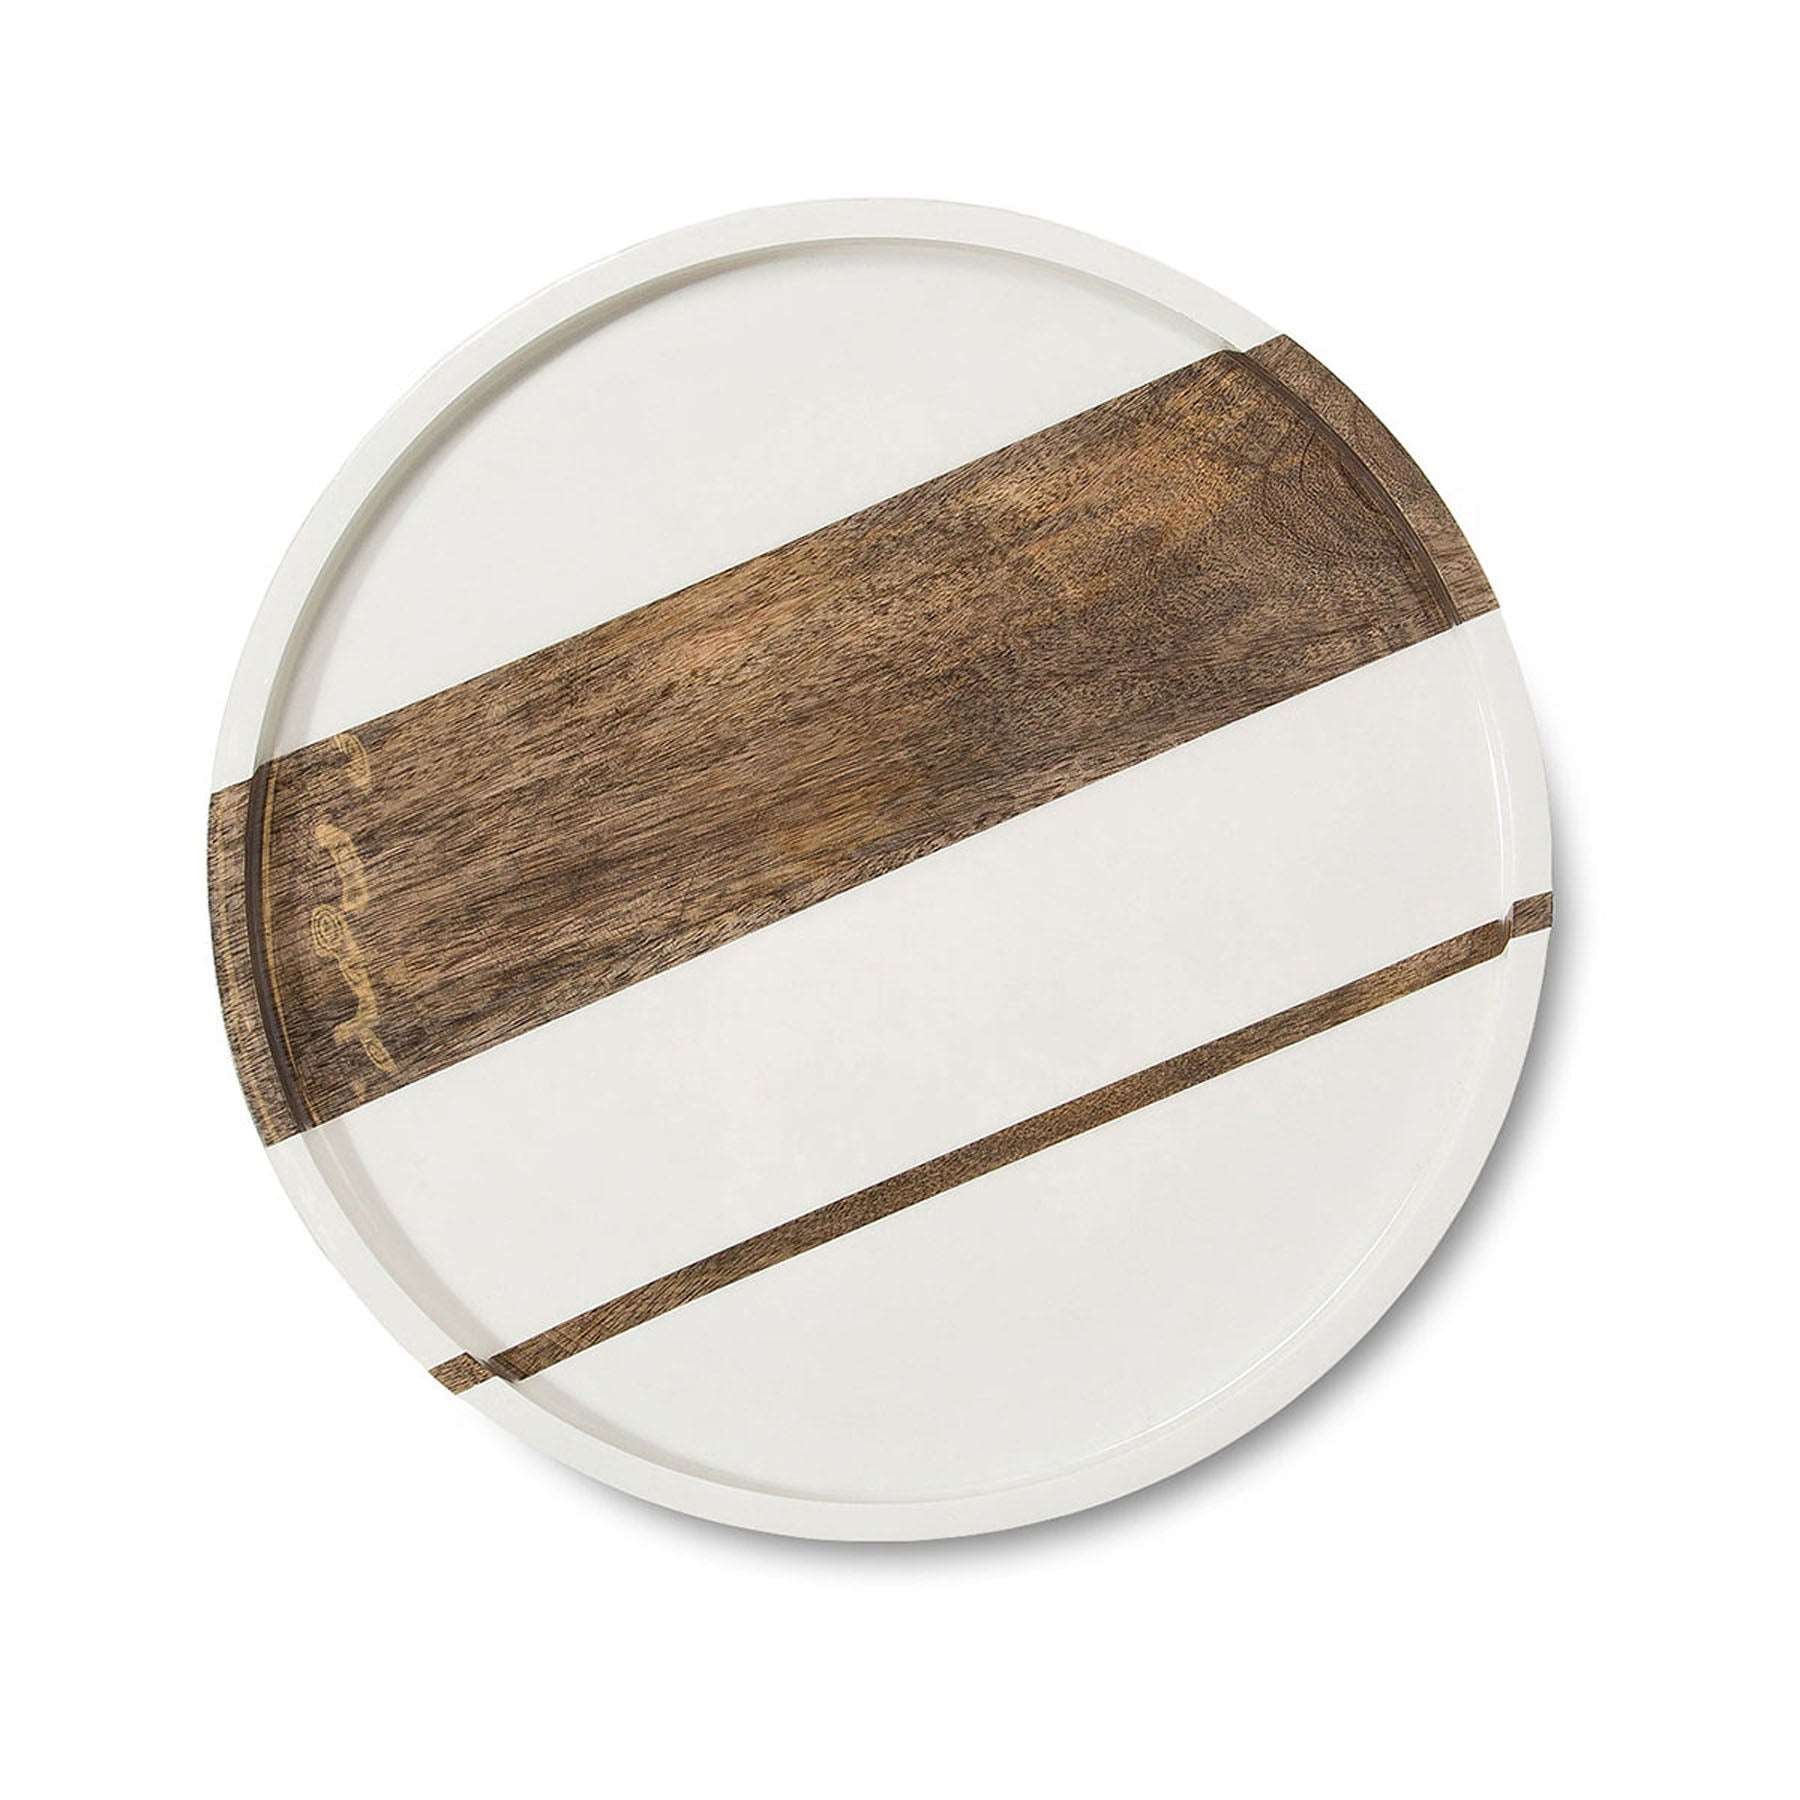 Mango wood in cream with natural wood stripes tray